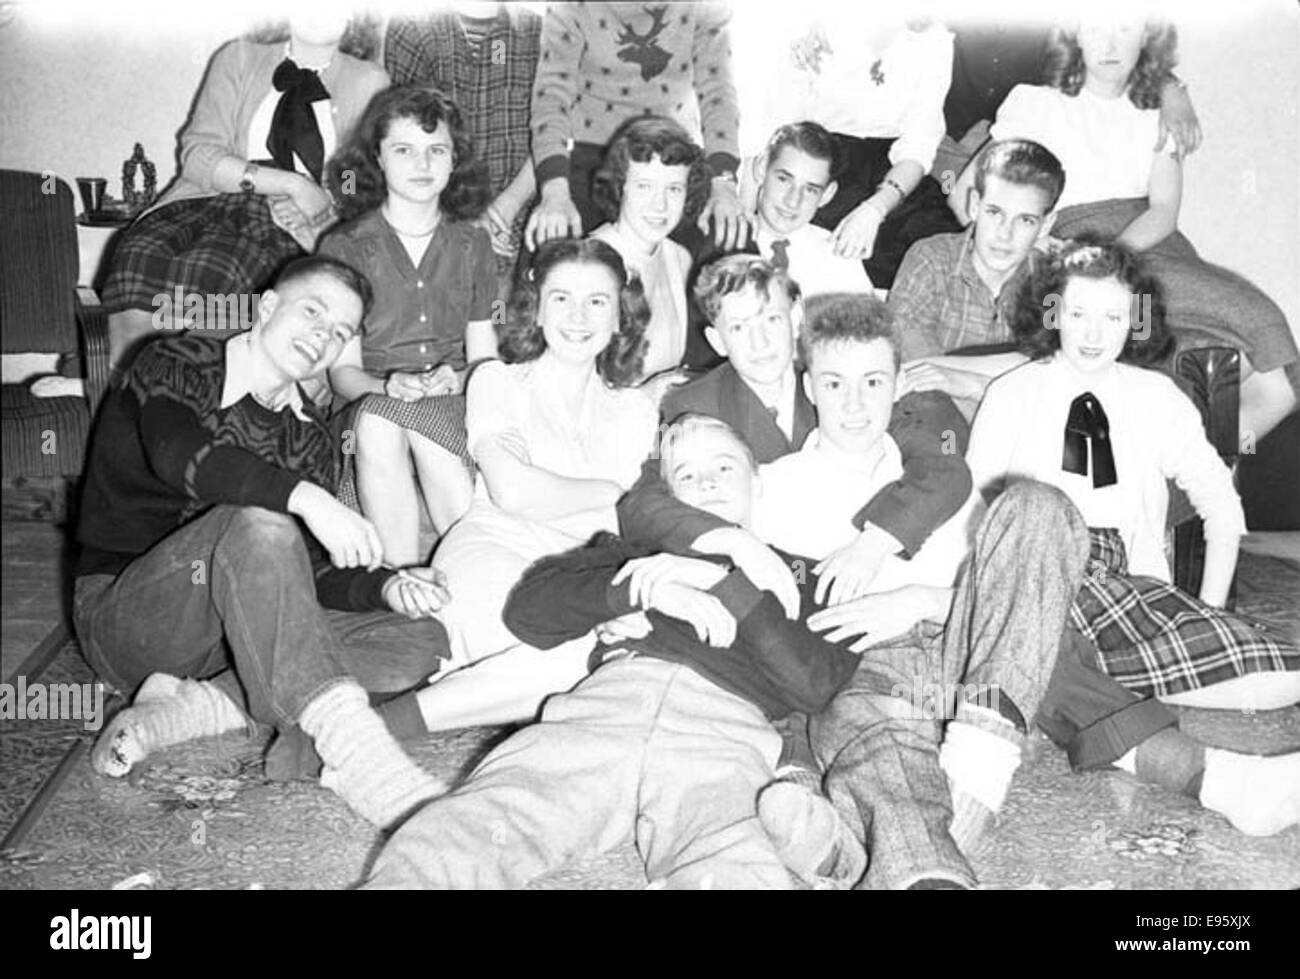 Young people posing for a group shot. March 1948 21/4 x 31/4 negative This is one of 54 photos in the album “Fort Macleod’s Anonymous”. Most are shot in Fort Macleod, Alberta in the late 1940s. The donor of the p Stock Photo